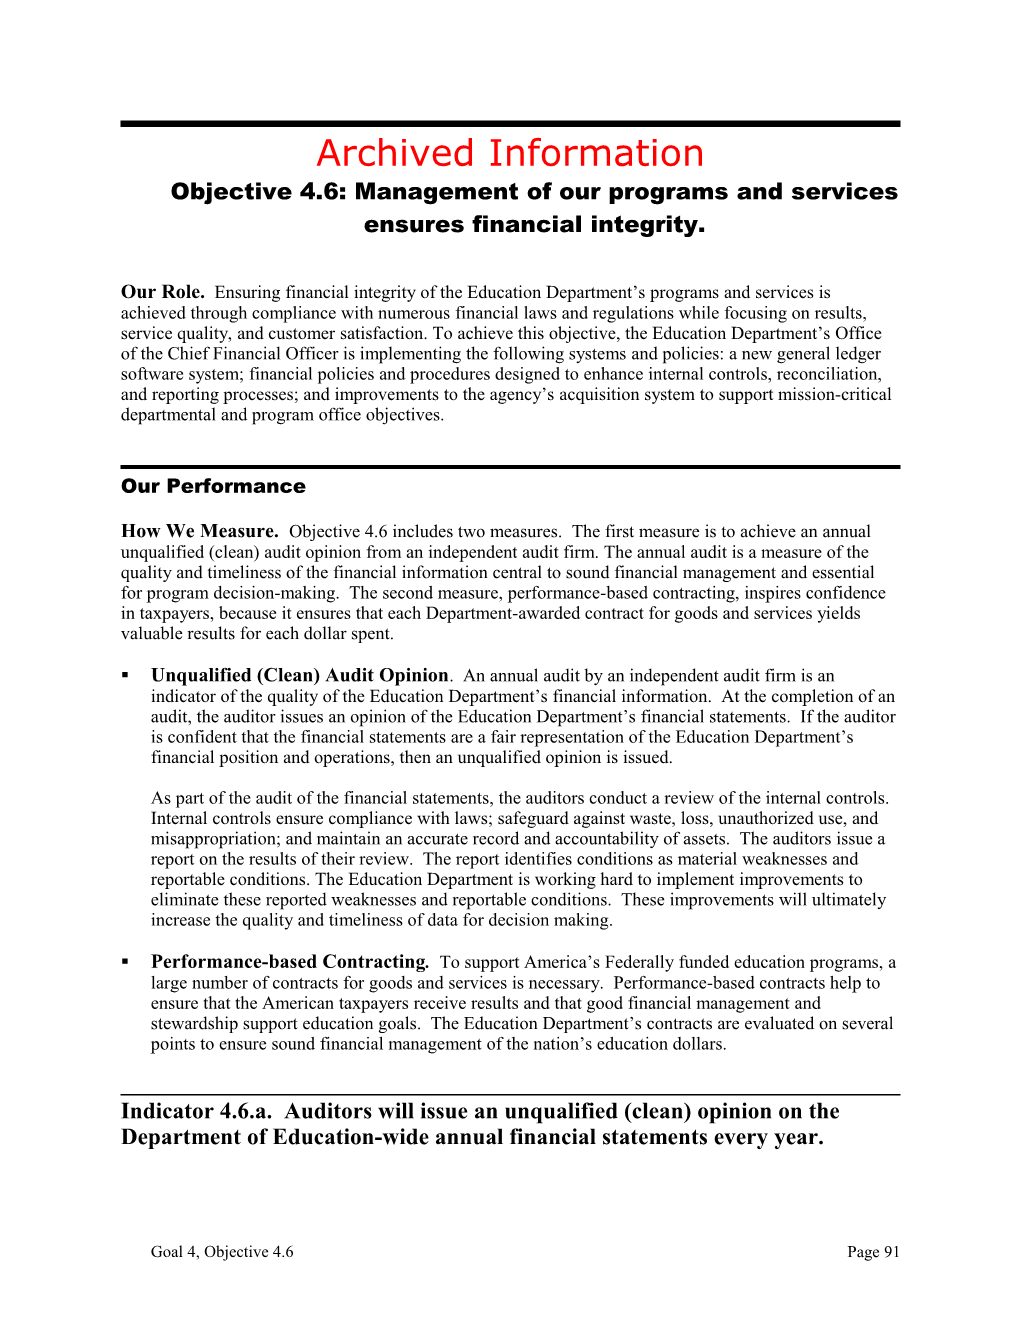 Archived: Objective 4.6: Management of Our Programs and Services Ensures Financial Integrity